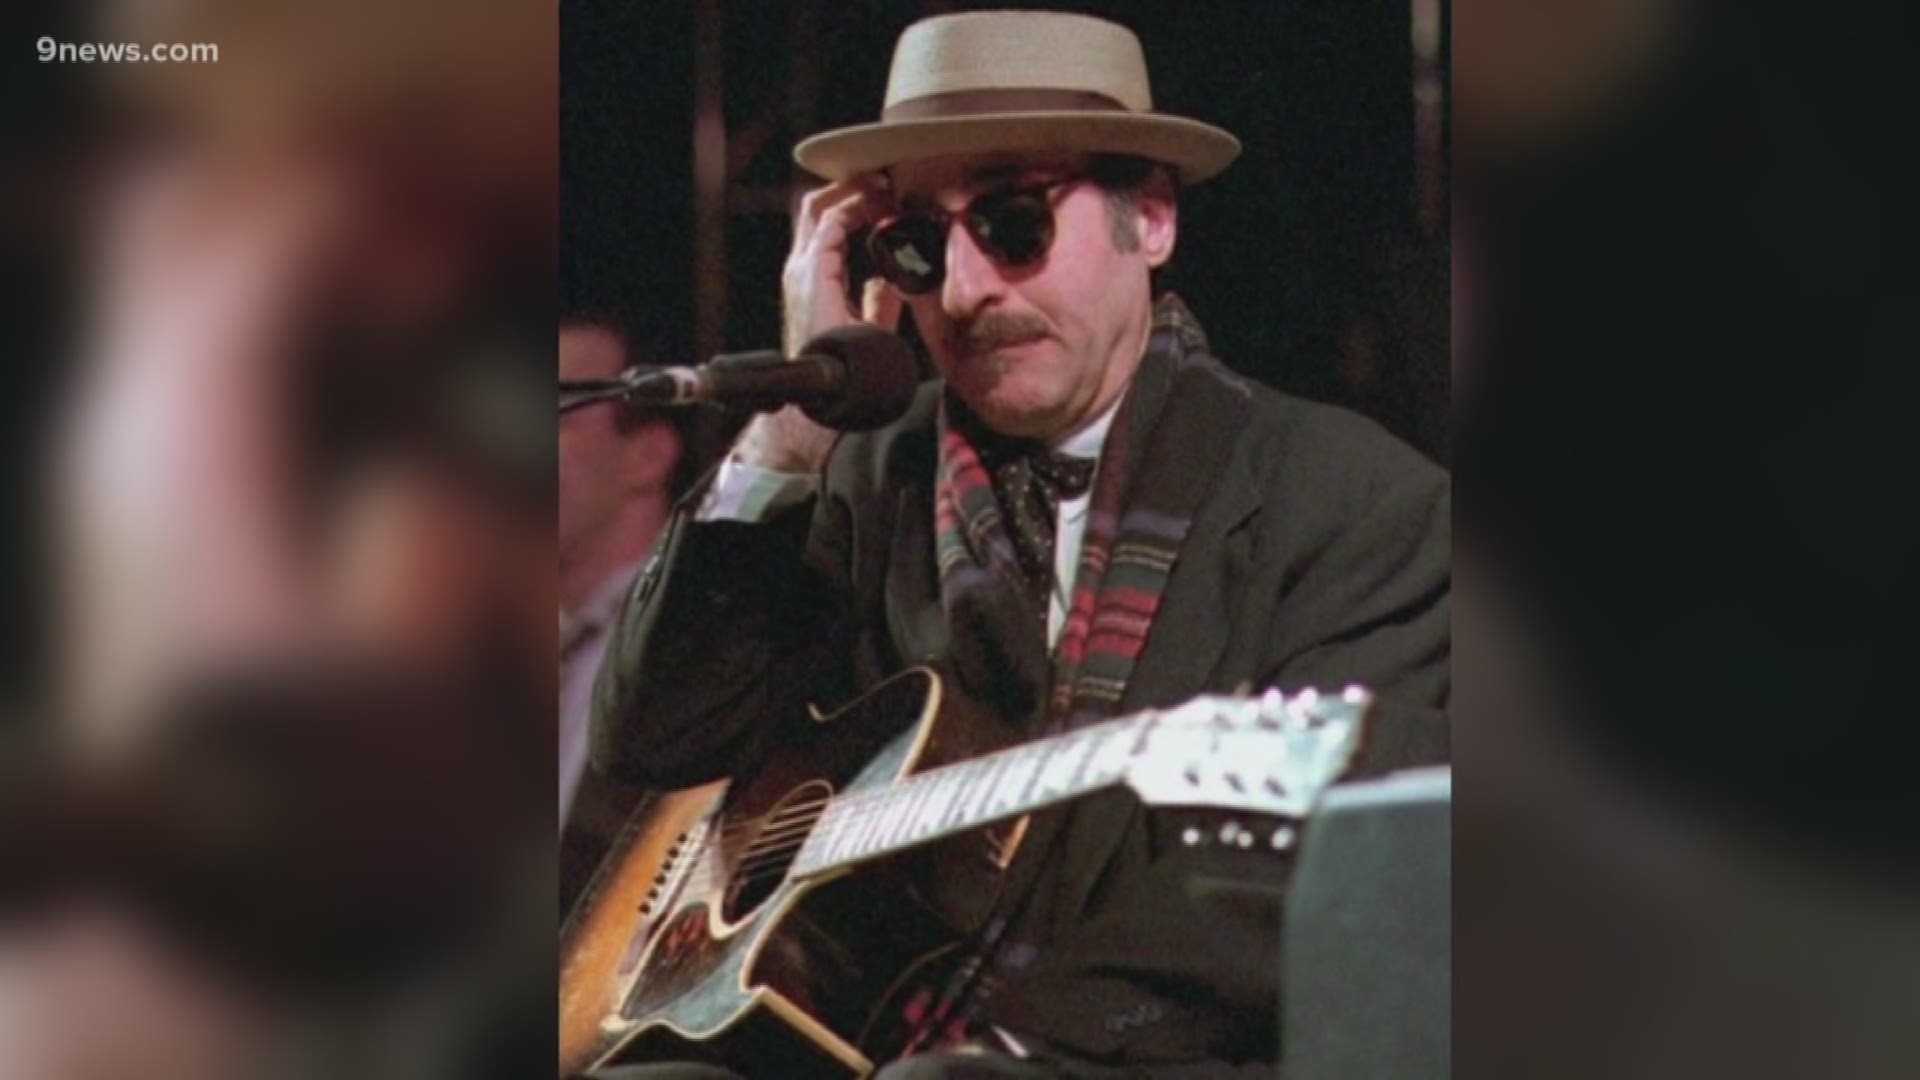 Leon Redbone's career got a boost in the early 1970s when Bob Dylan met him at a folk festival.